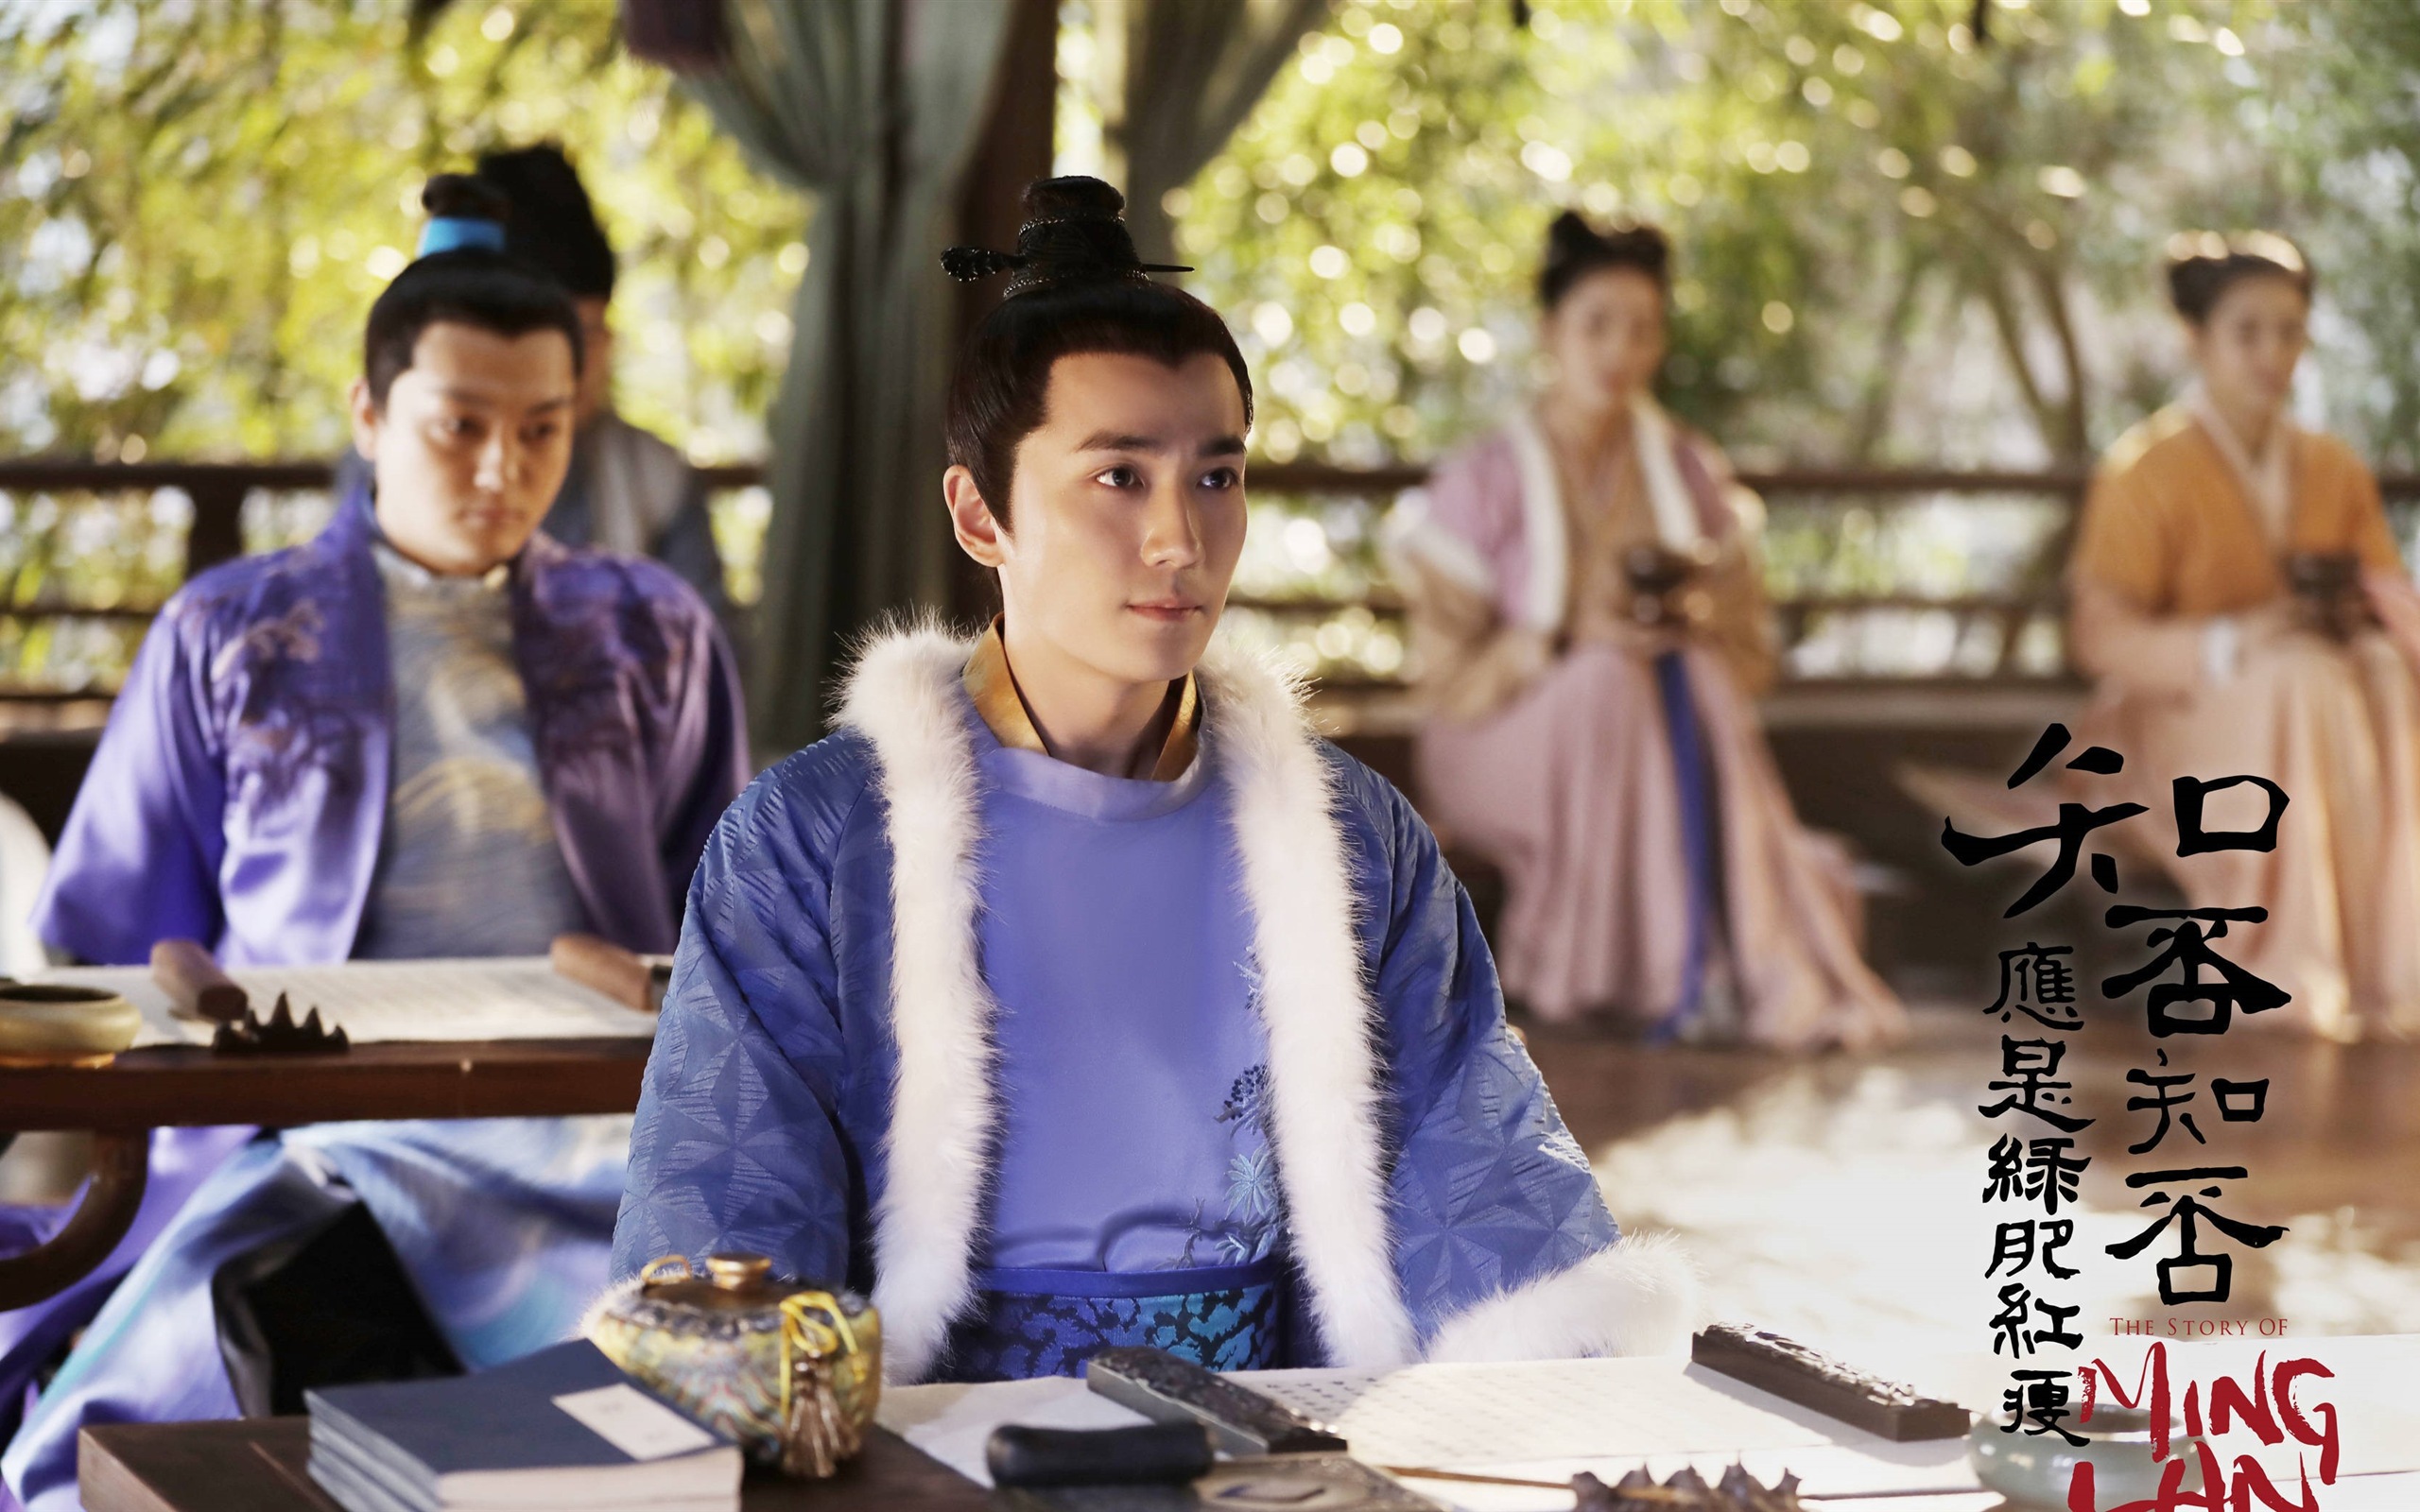 The Story Of MingLan, TV series HD wallpapers #52 - 2560x1600